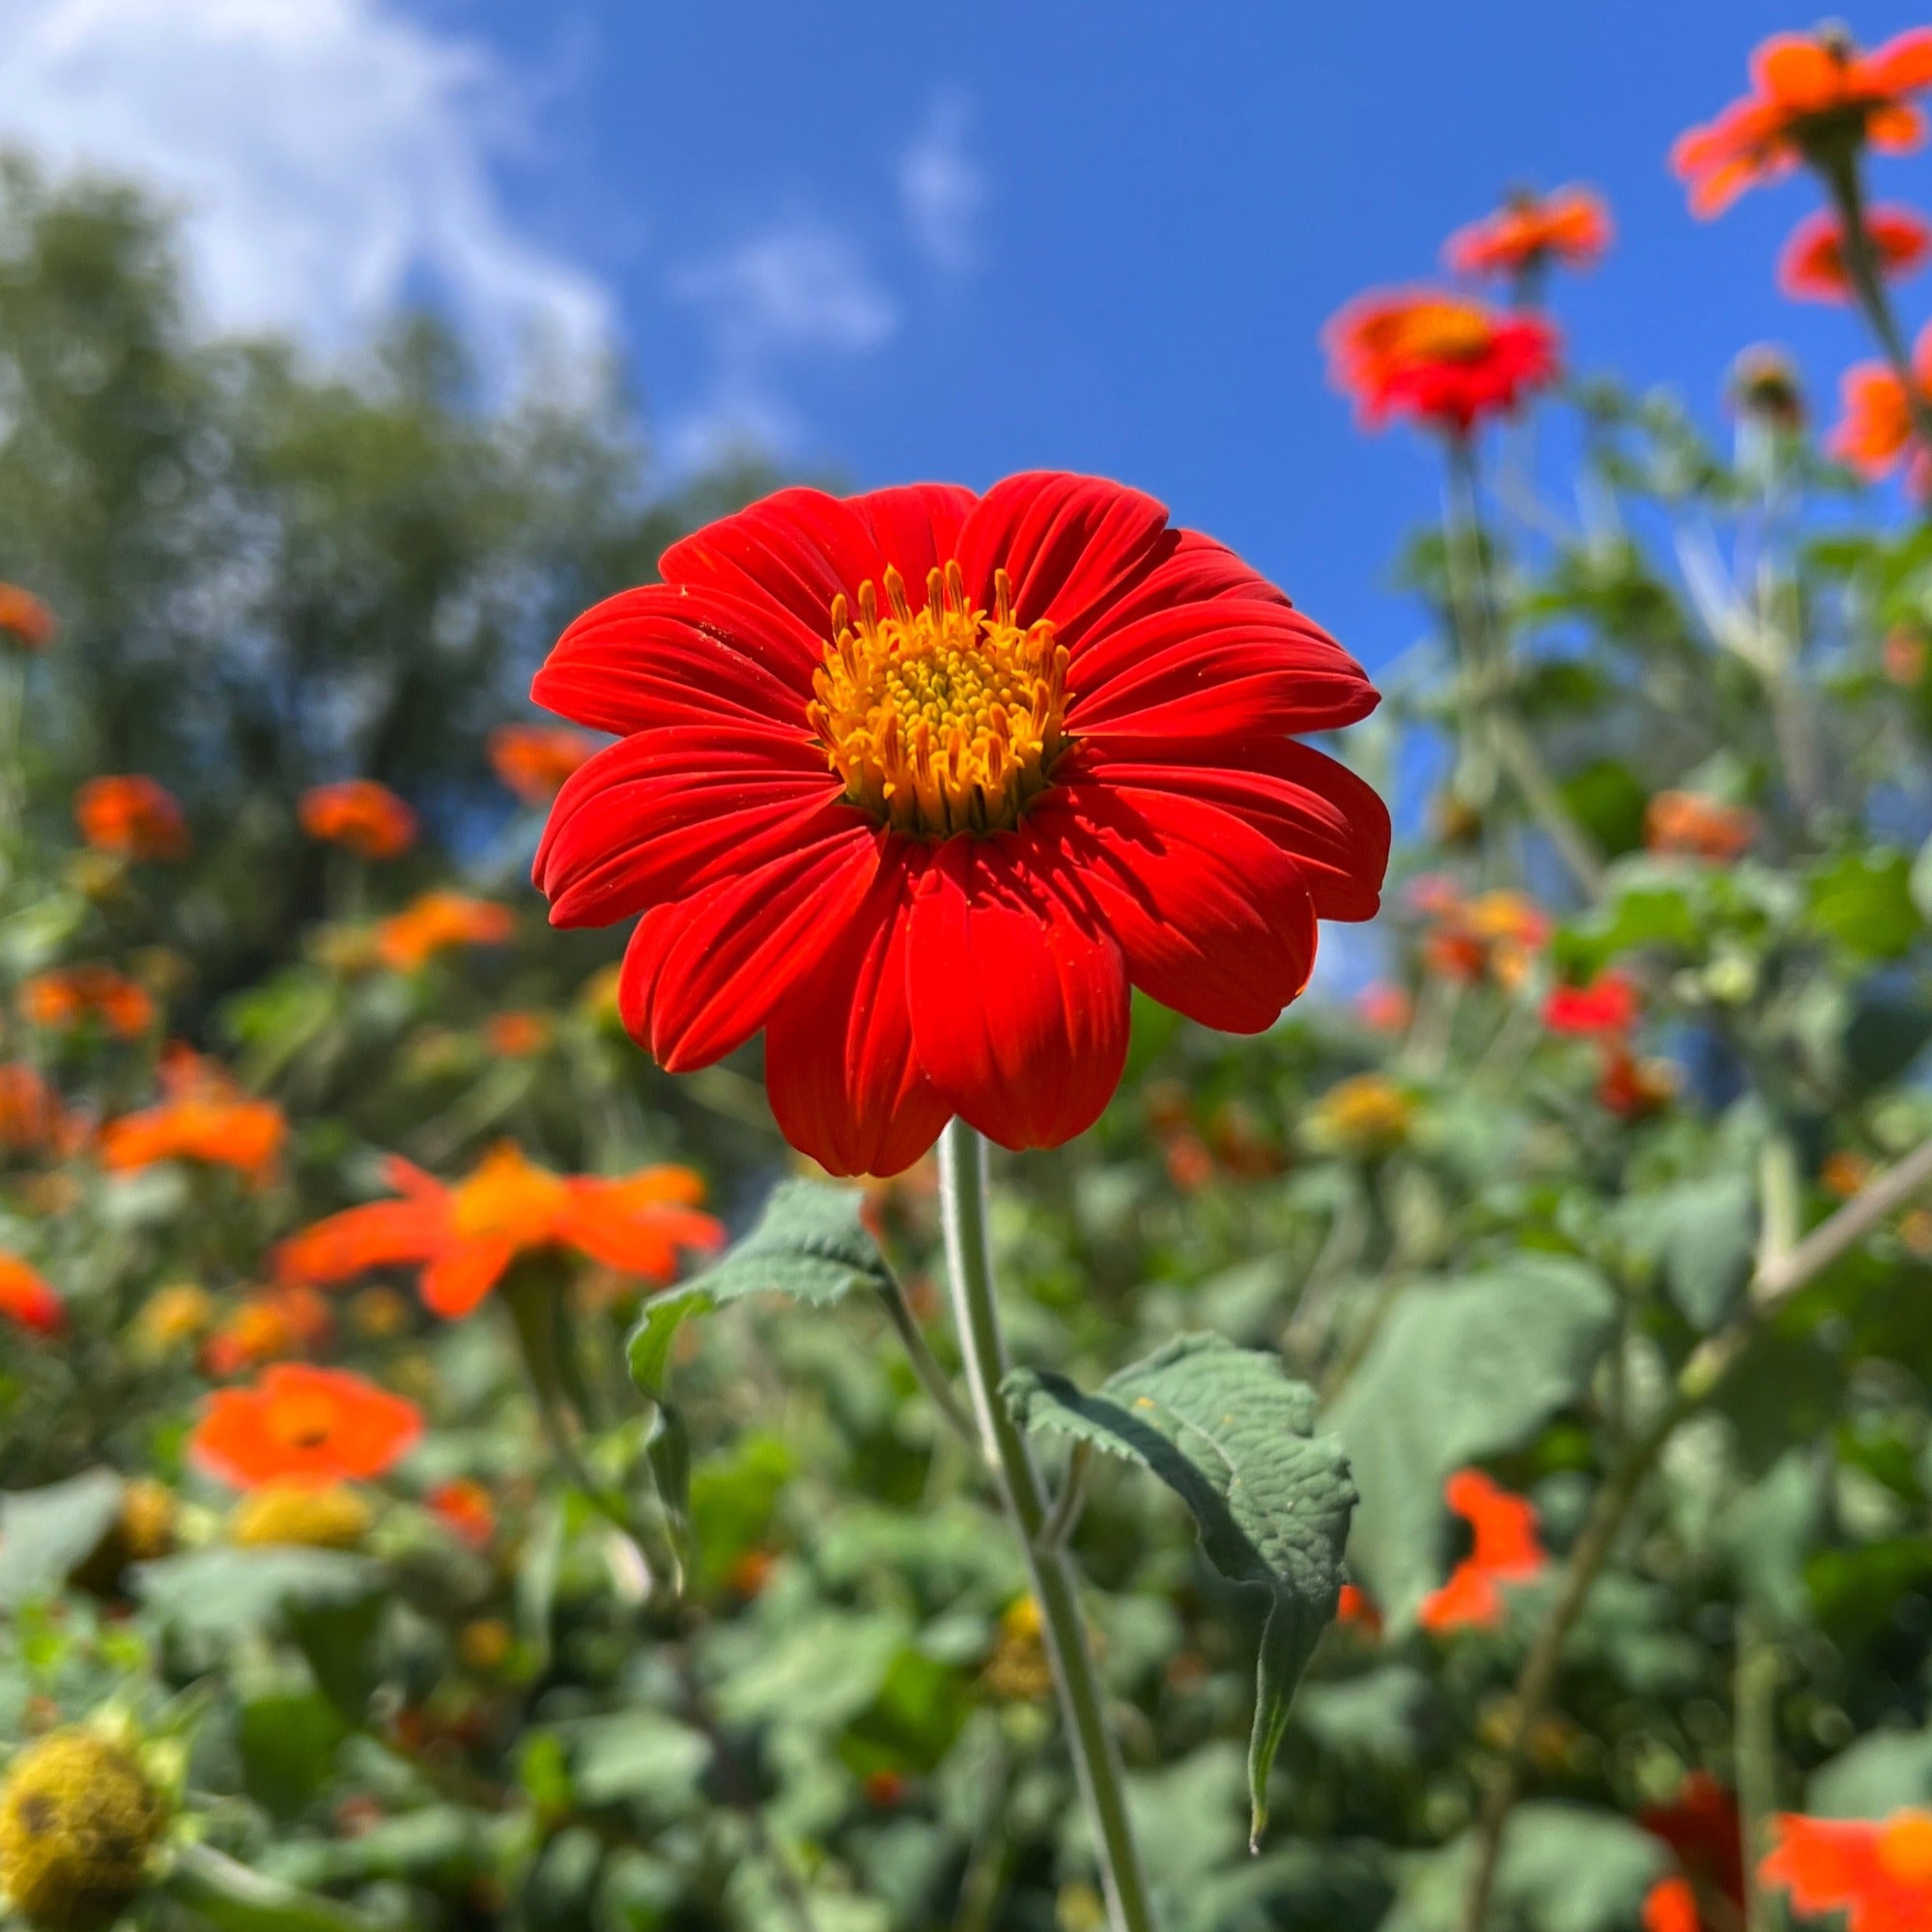 A tithonia mexican torch red sunflower bloom framed against the sky with more blooms and plants in the background